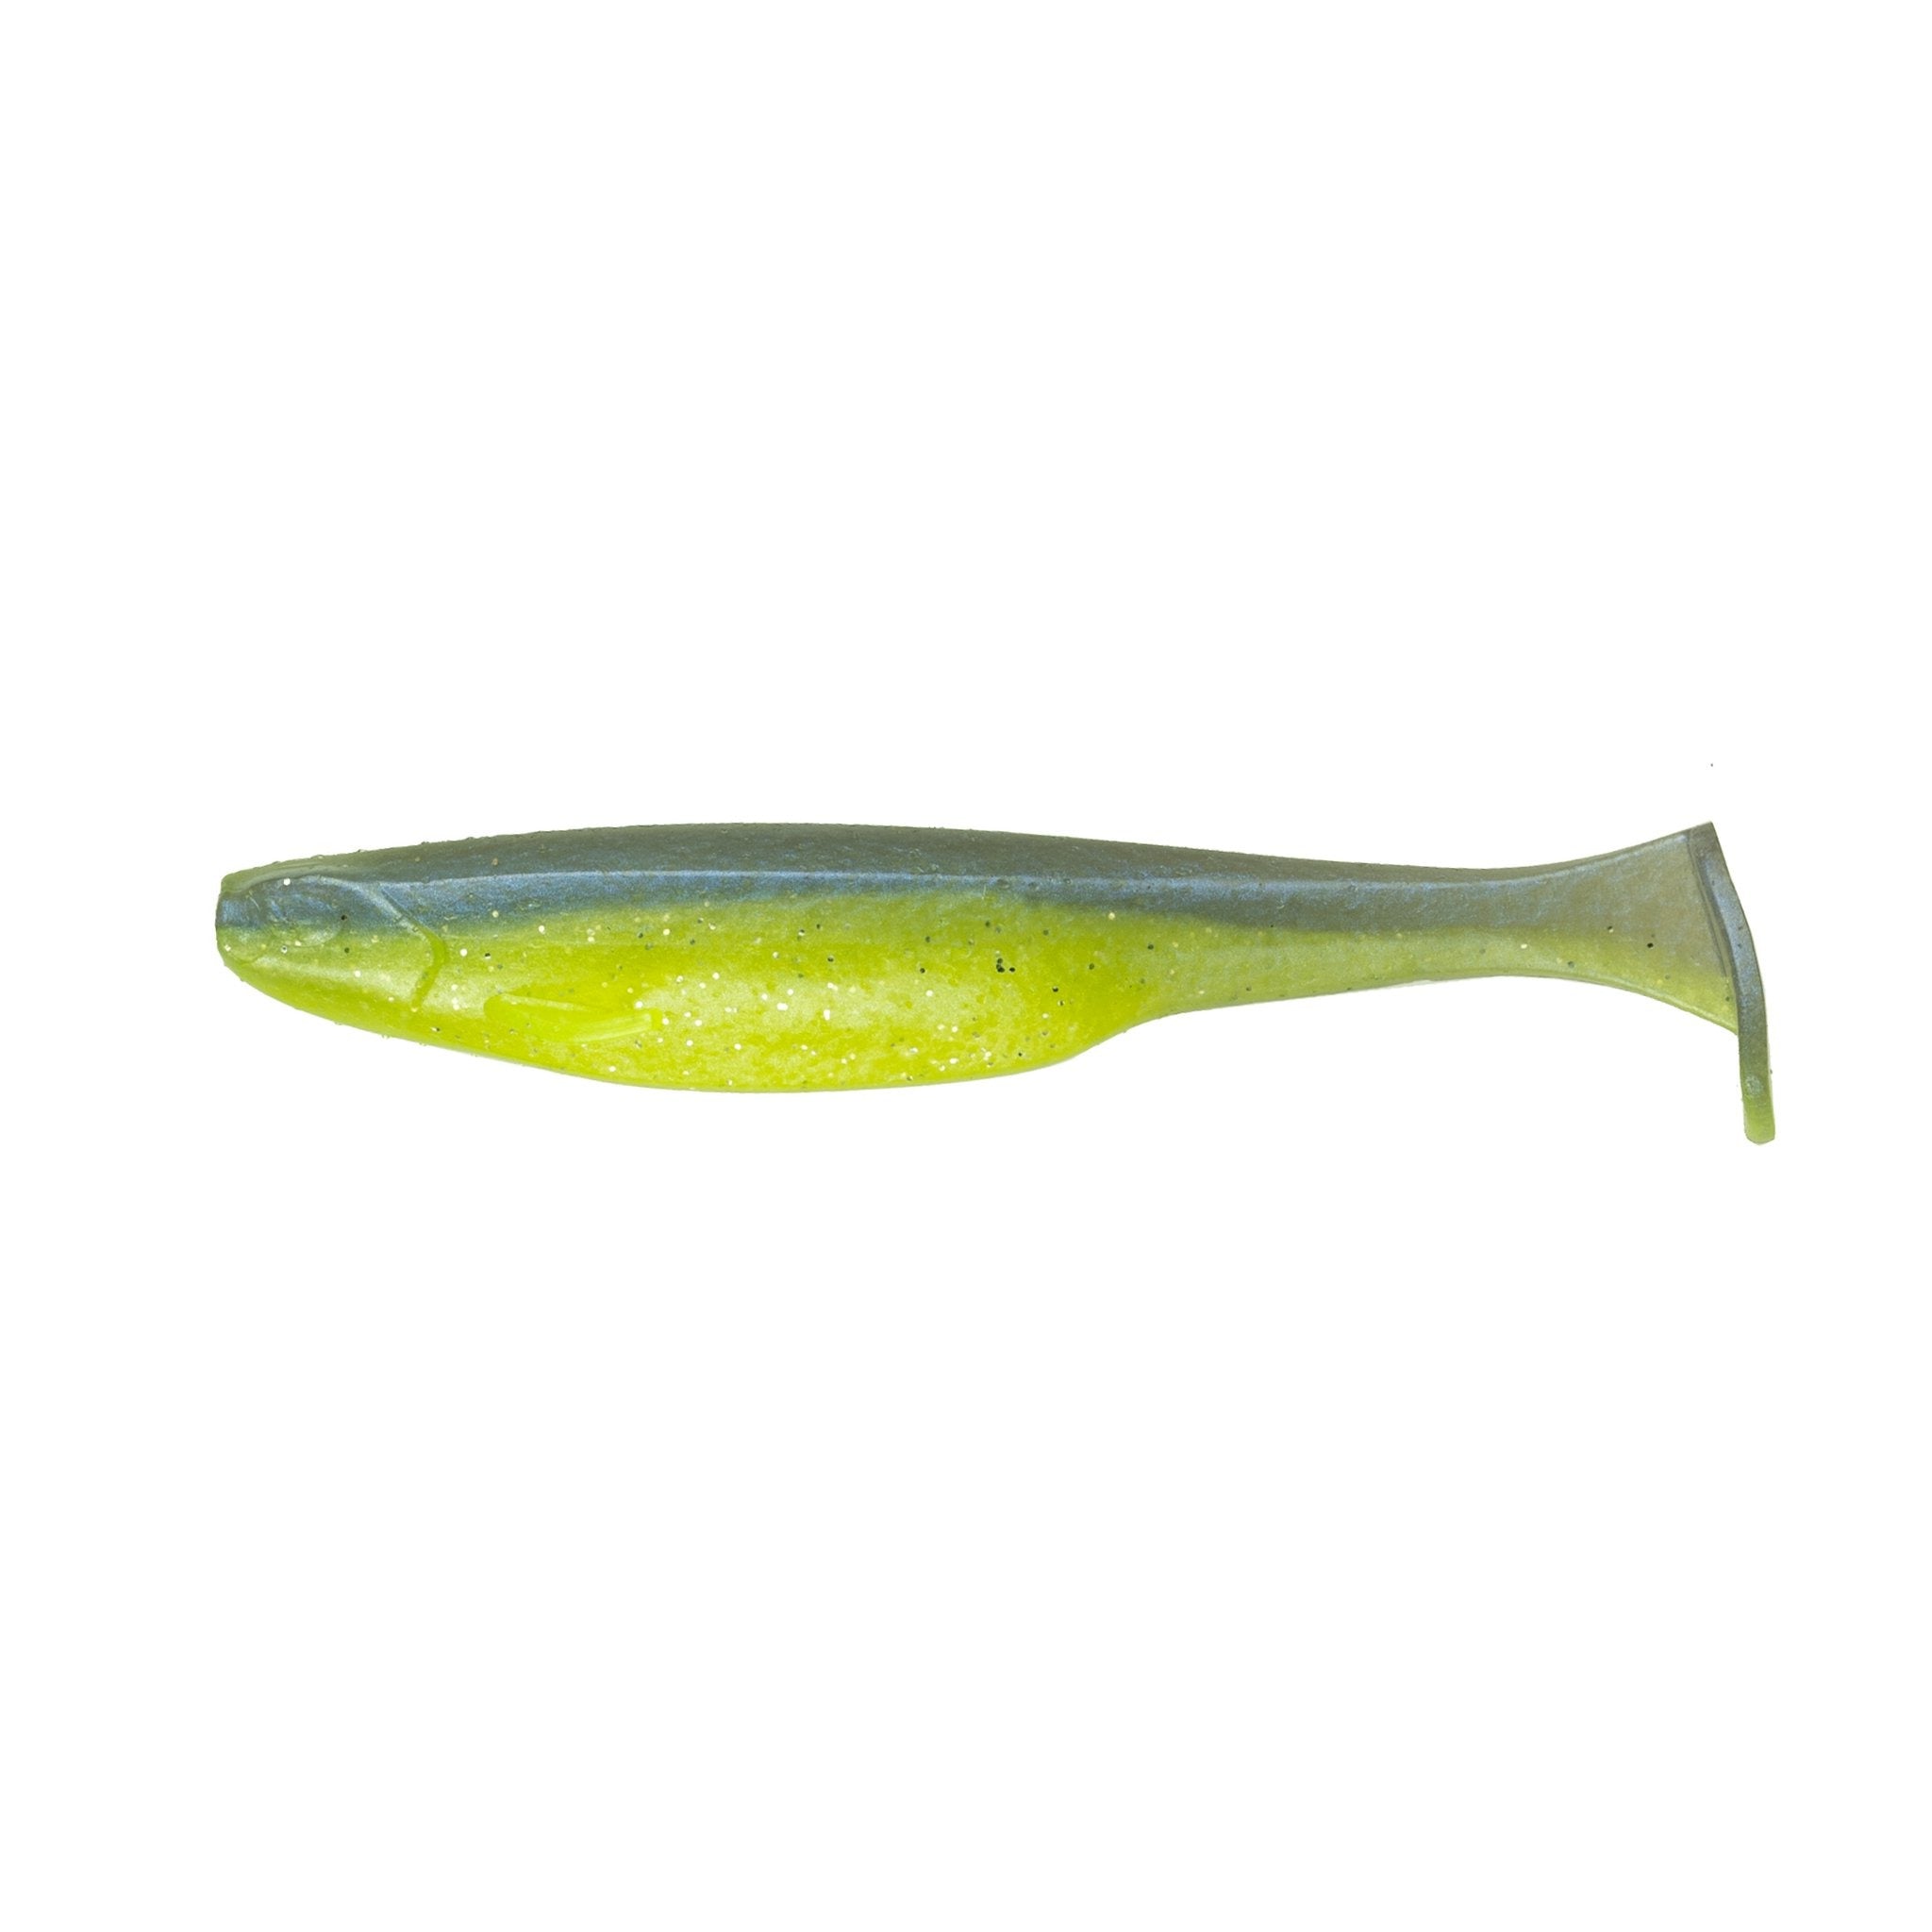 6th Sense Whale Swimbait Sexified Shad / 4.5